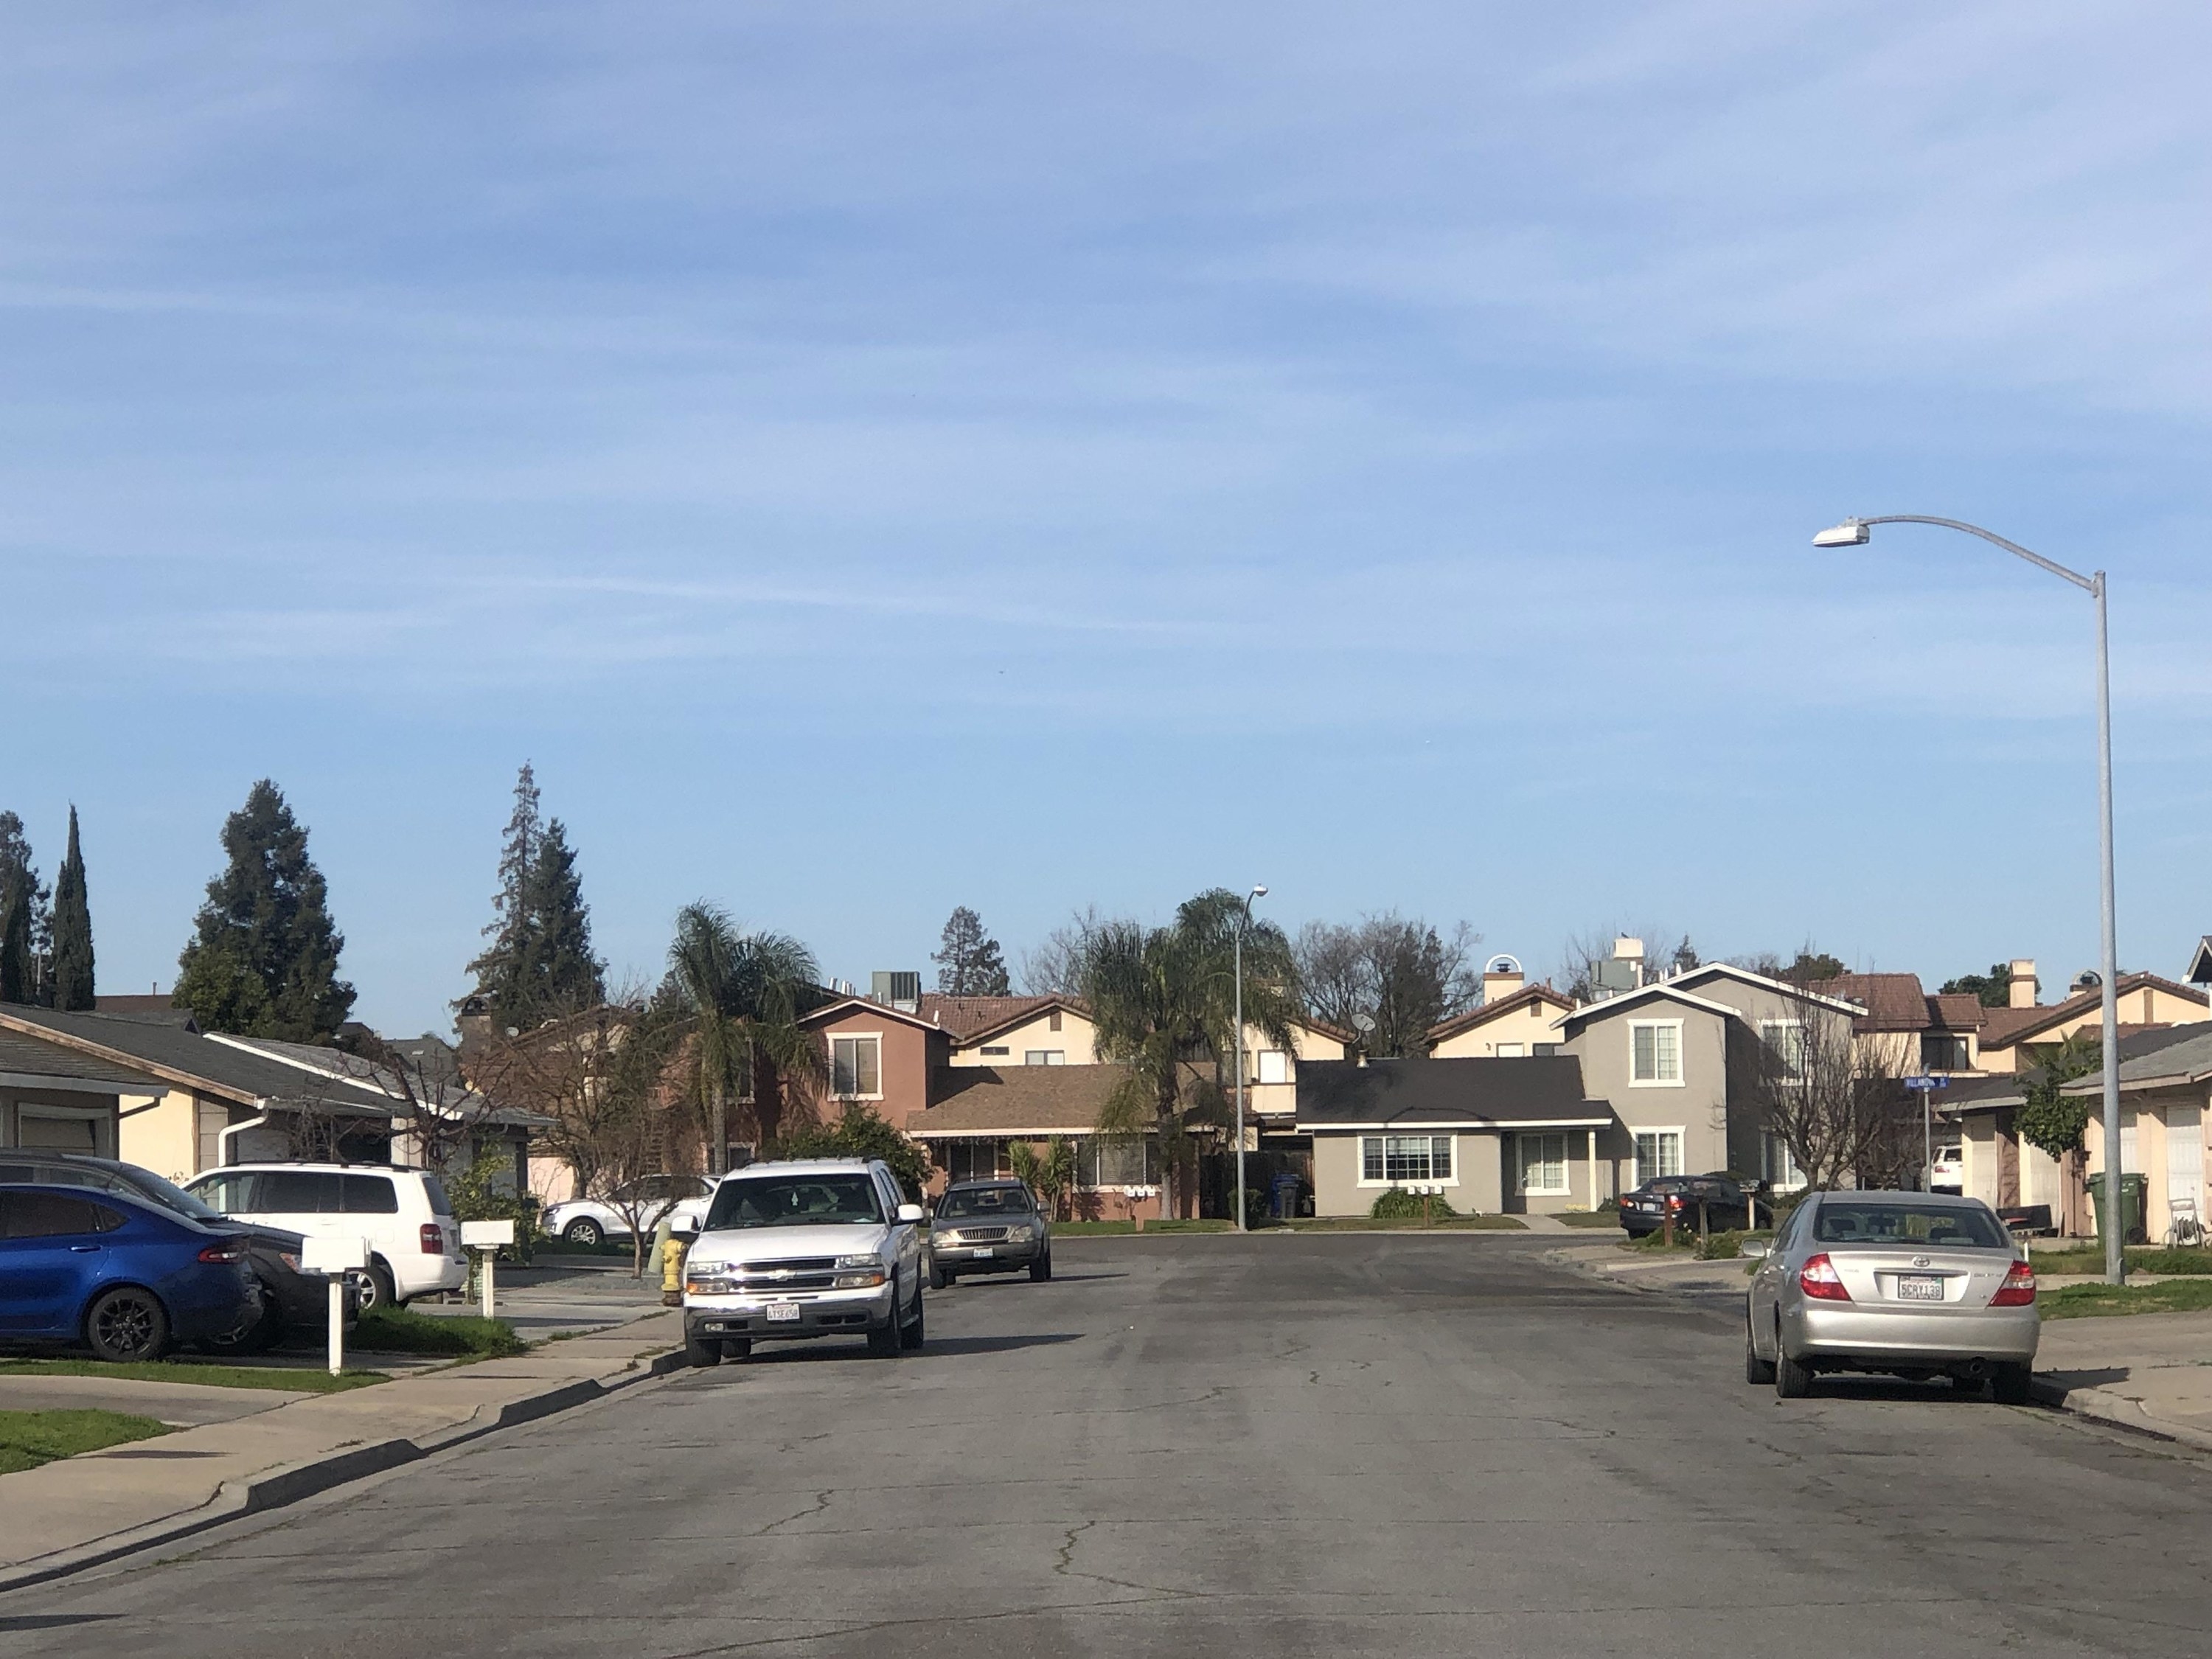 A dead-end in a suburban neighborhood featuring average-sized houses with driveways and cars parked in the street